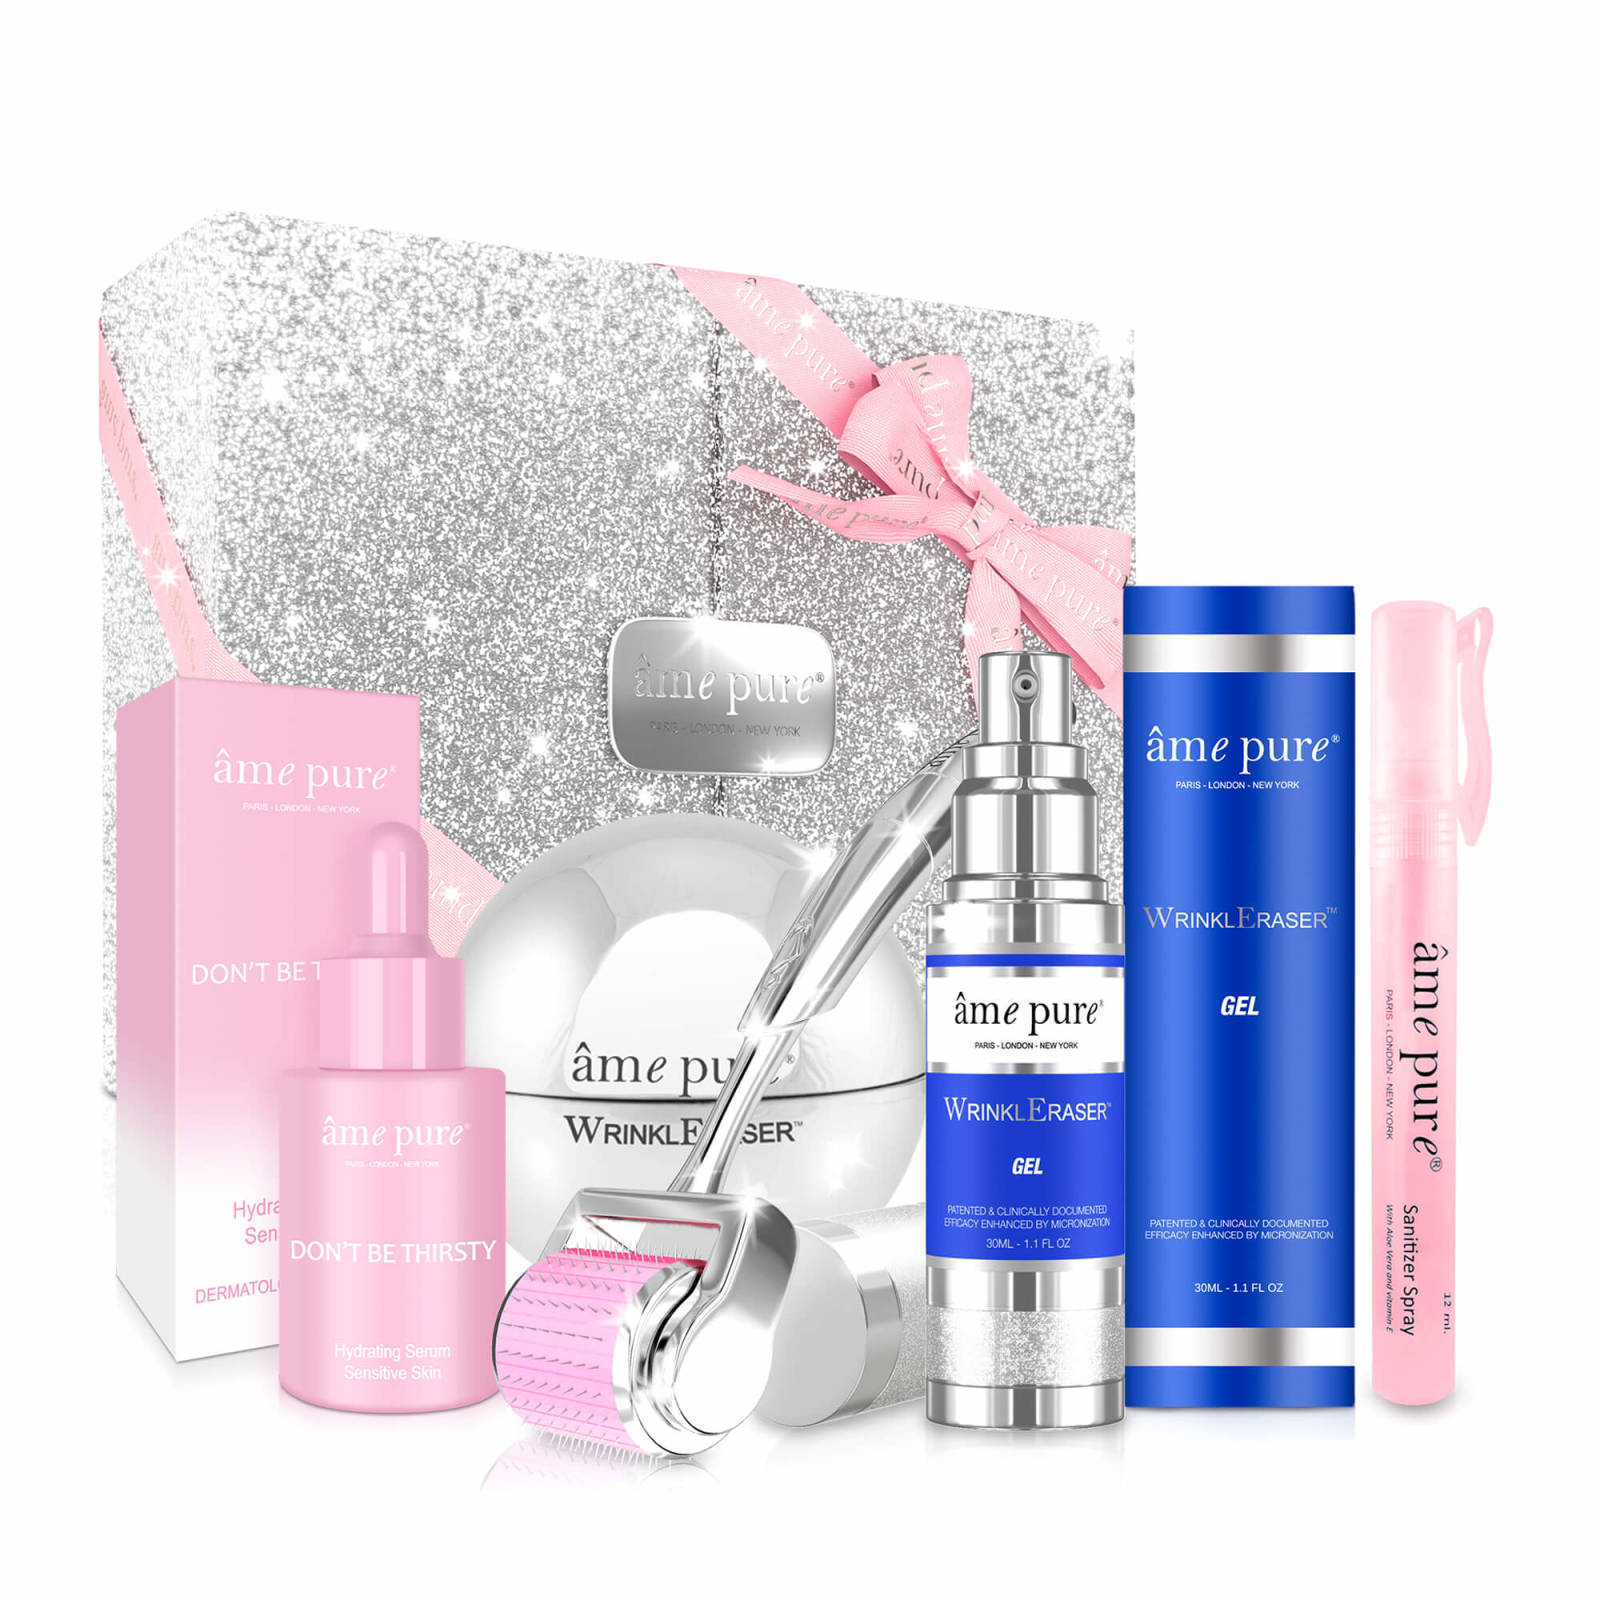 �me pure "I'M ALWAYS BY YOUR SIDE" Christmas Gift set